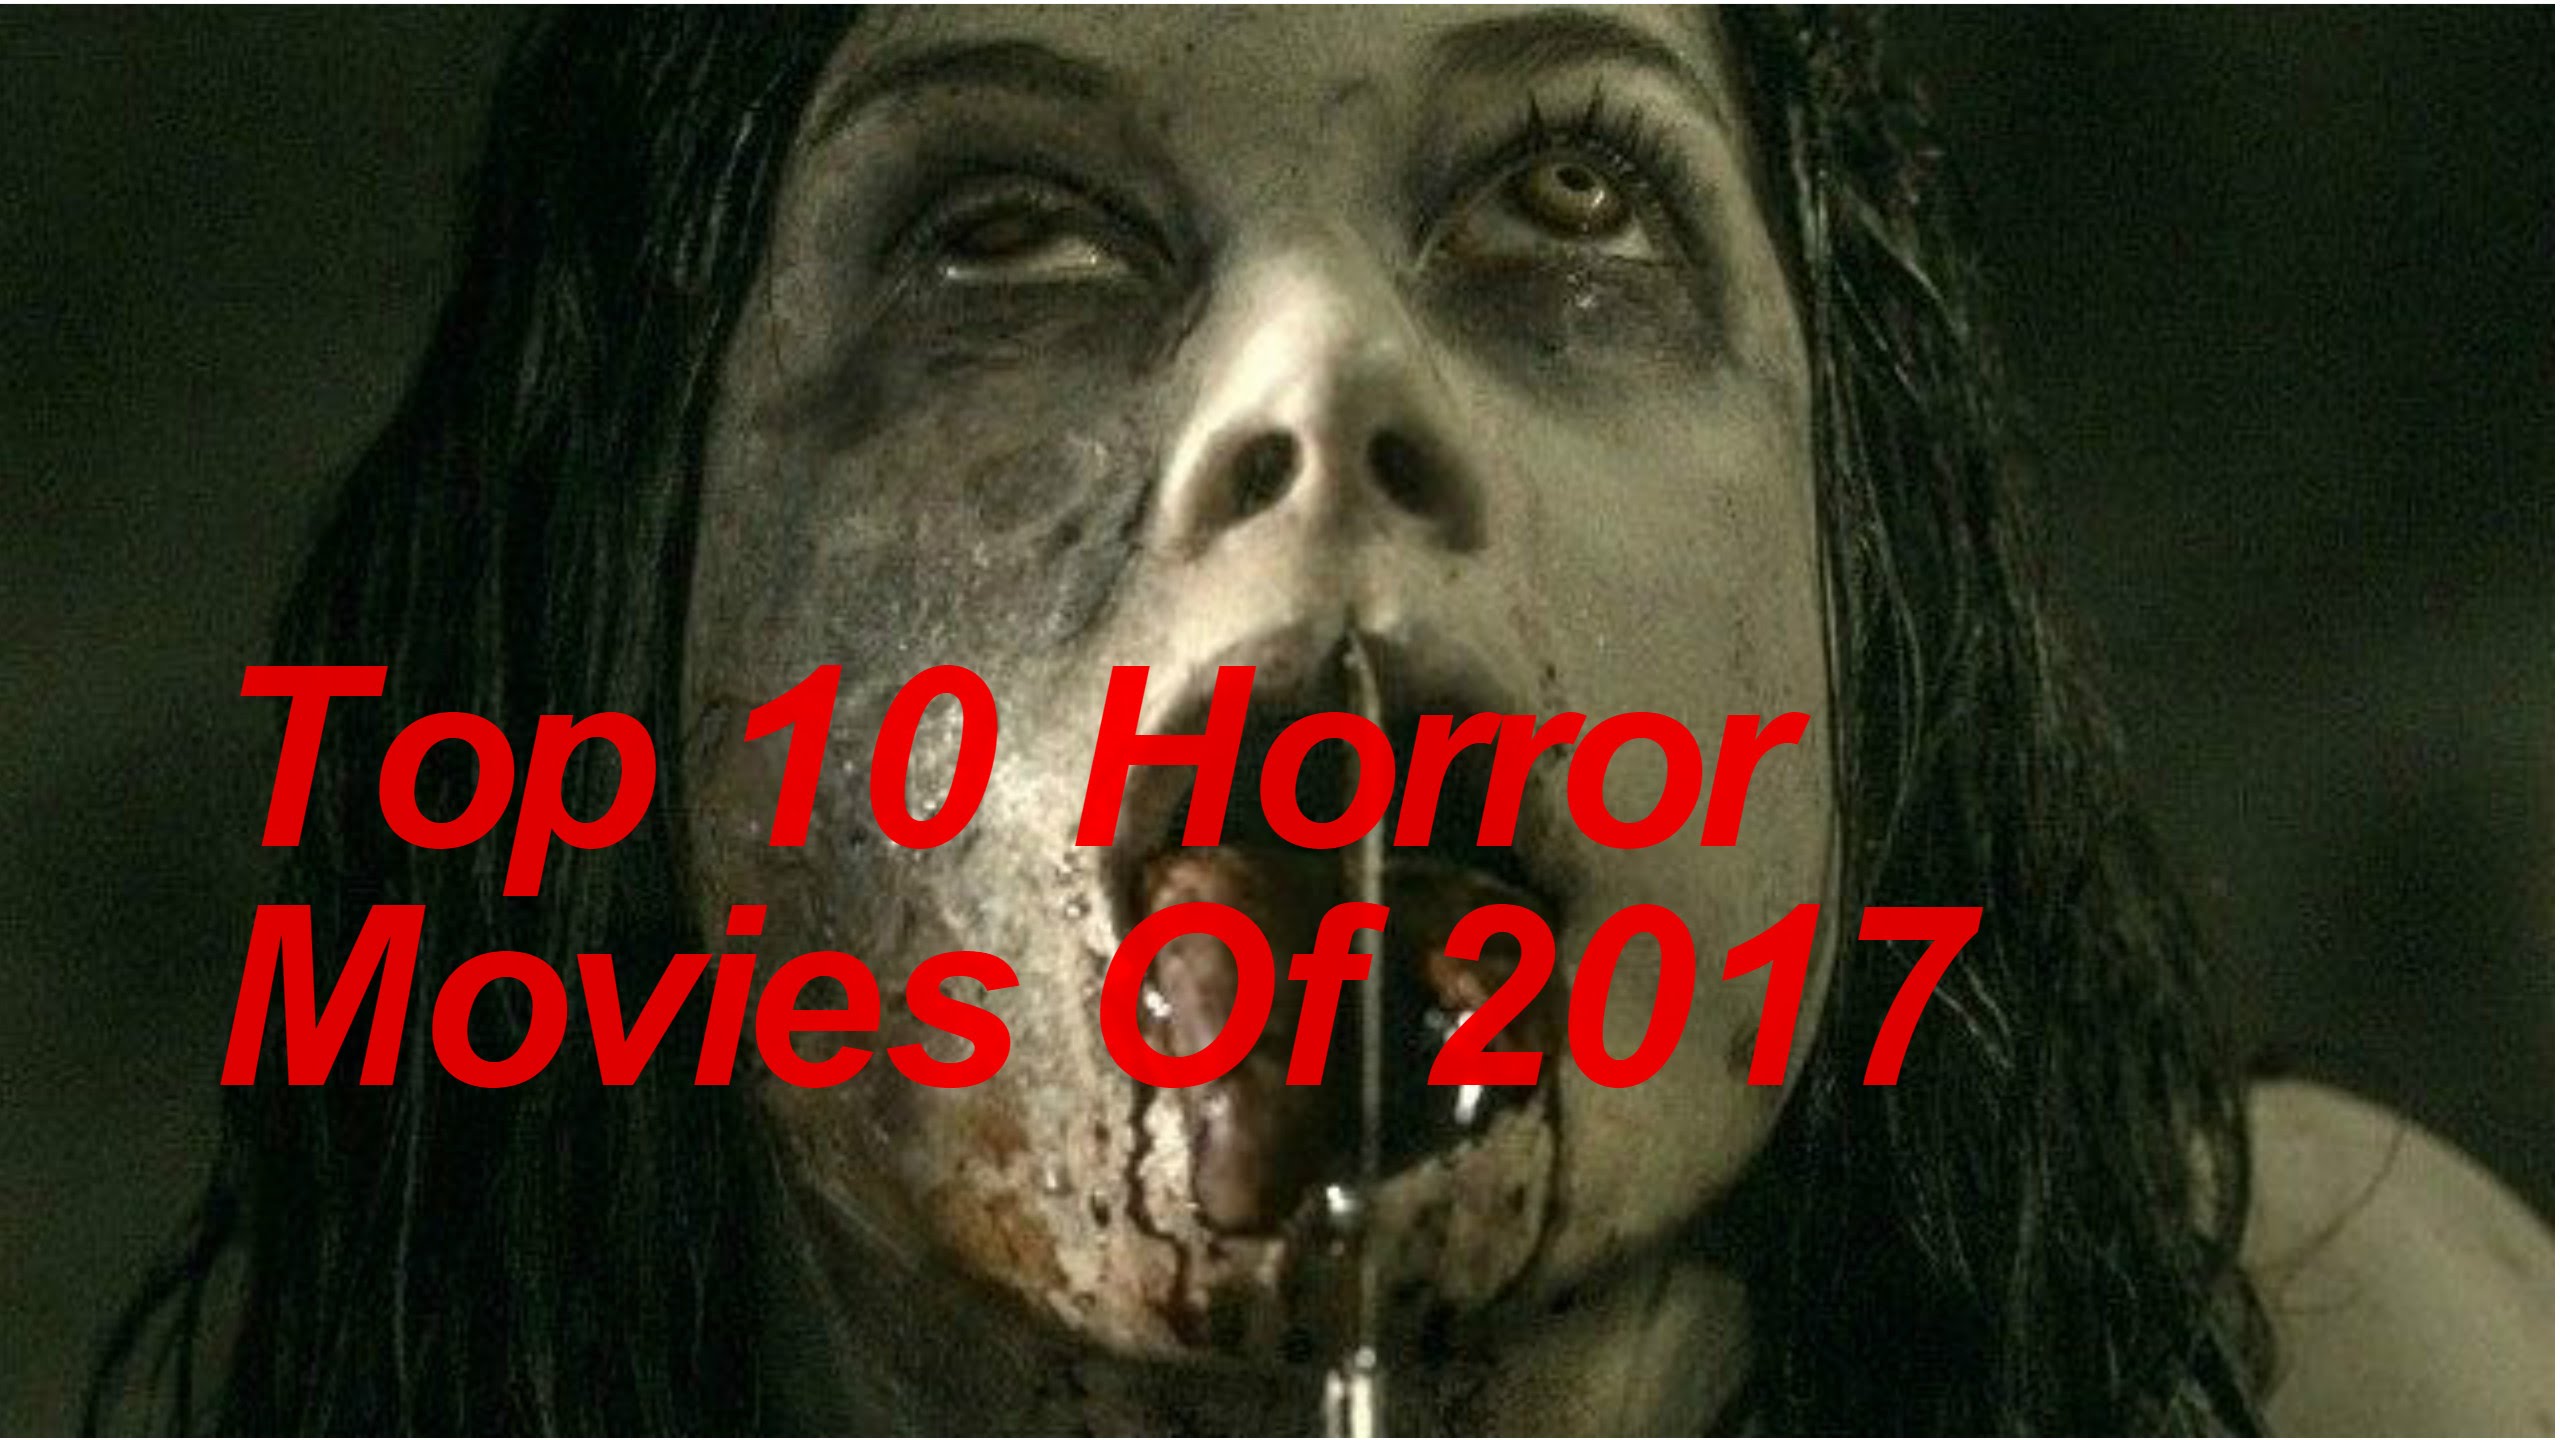 Top 10 Horror Movies 2017 - Best Toppers